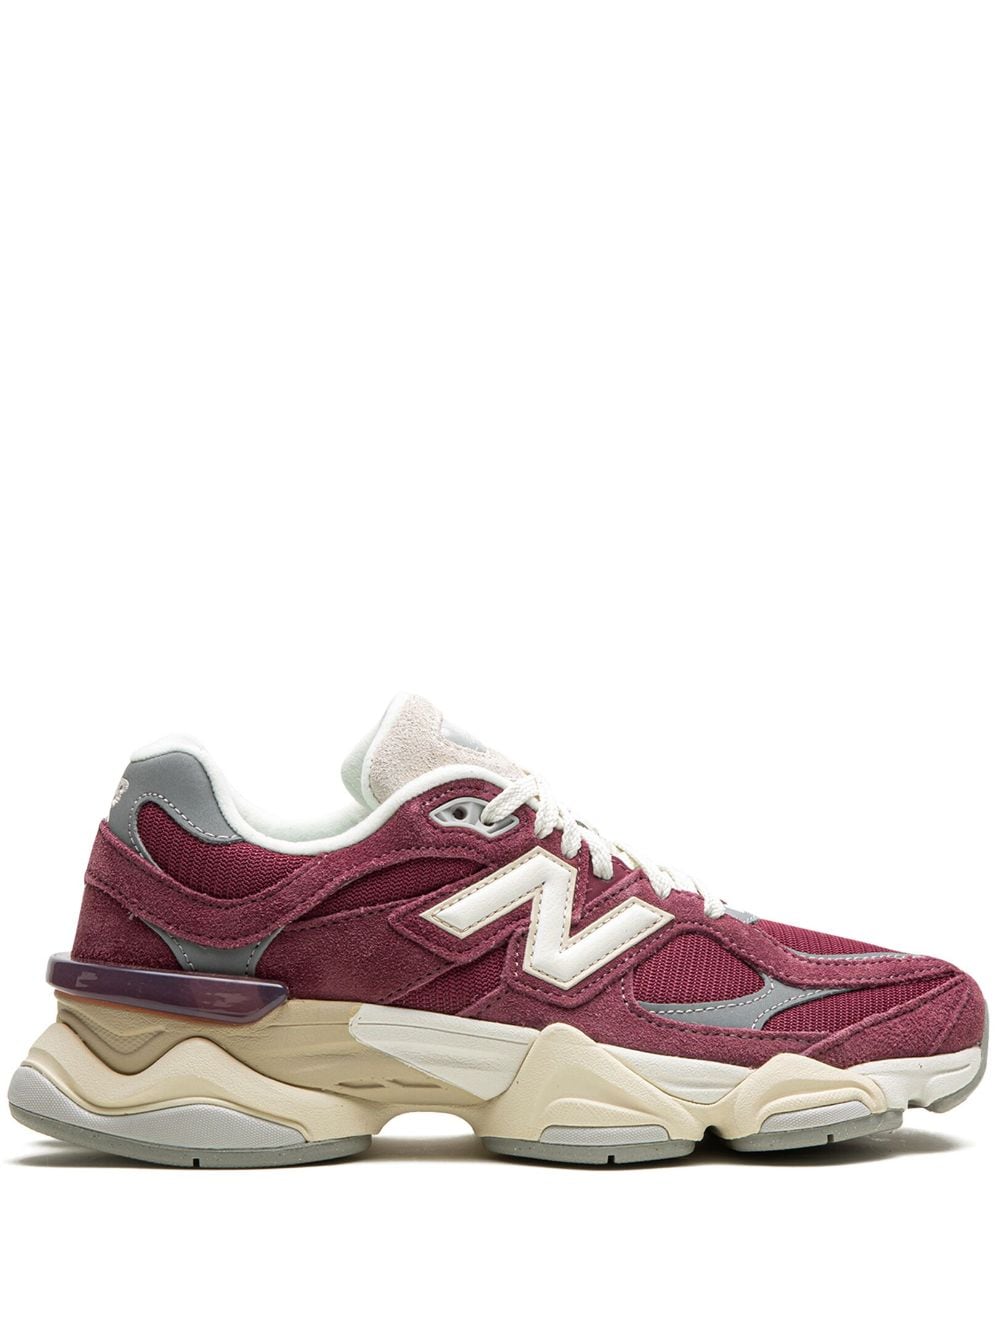 New Balance 9060 suede sneakers - Red